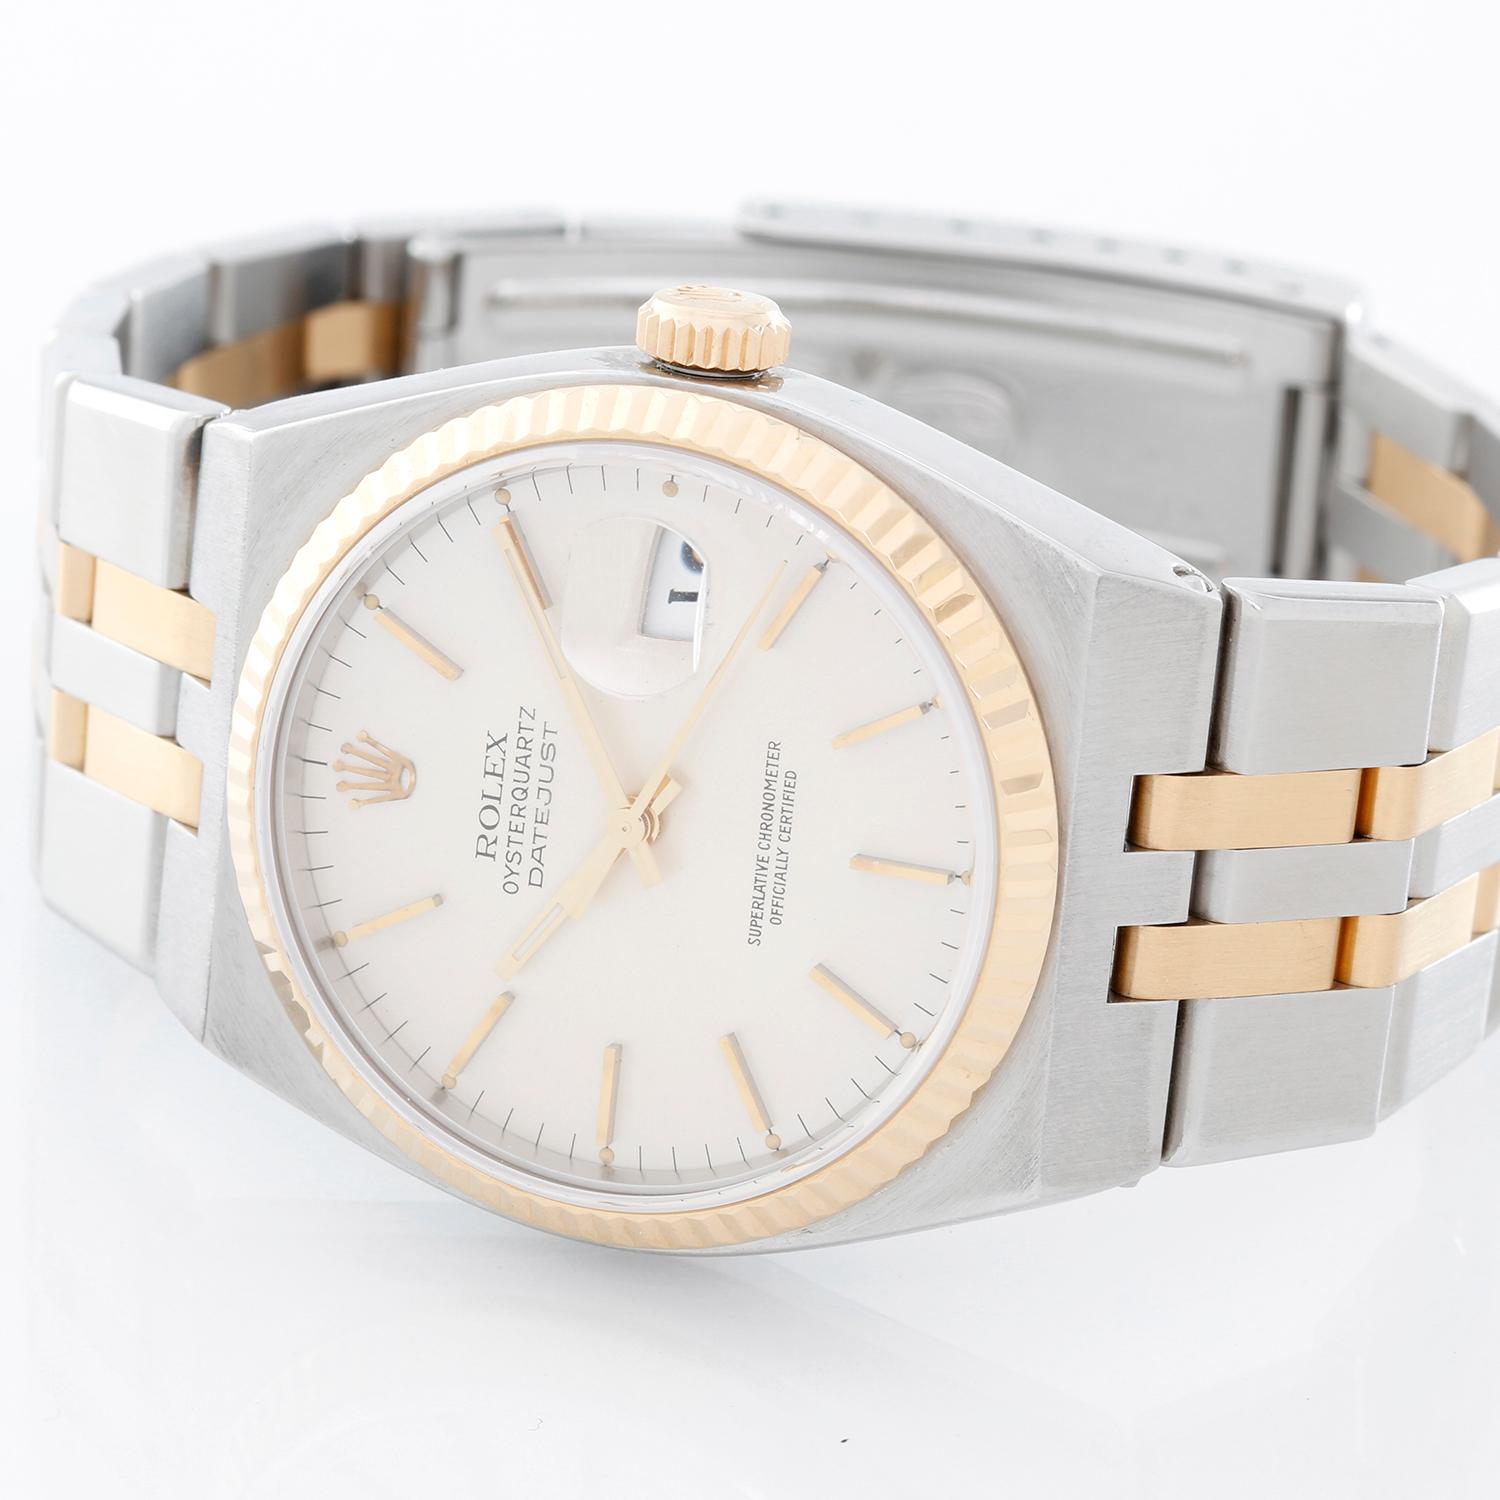 Rolex Oysterquartz Datejust 2-Tone Steel & Gold Men's Watch 17013 - Quartz, Quickset date, sapphire crystal. Stainless steel case with yellow gold fluted bezel  (35 mm diameter). Silvered dial with raised gold stick markers. Stainless steel and